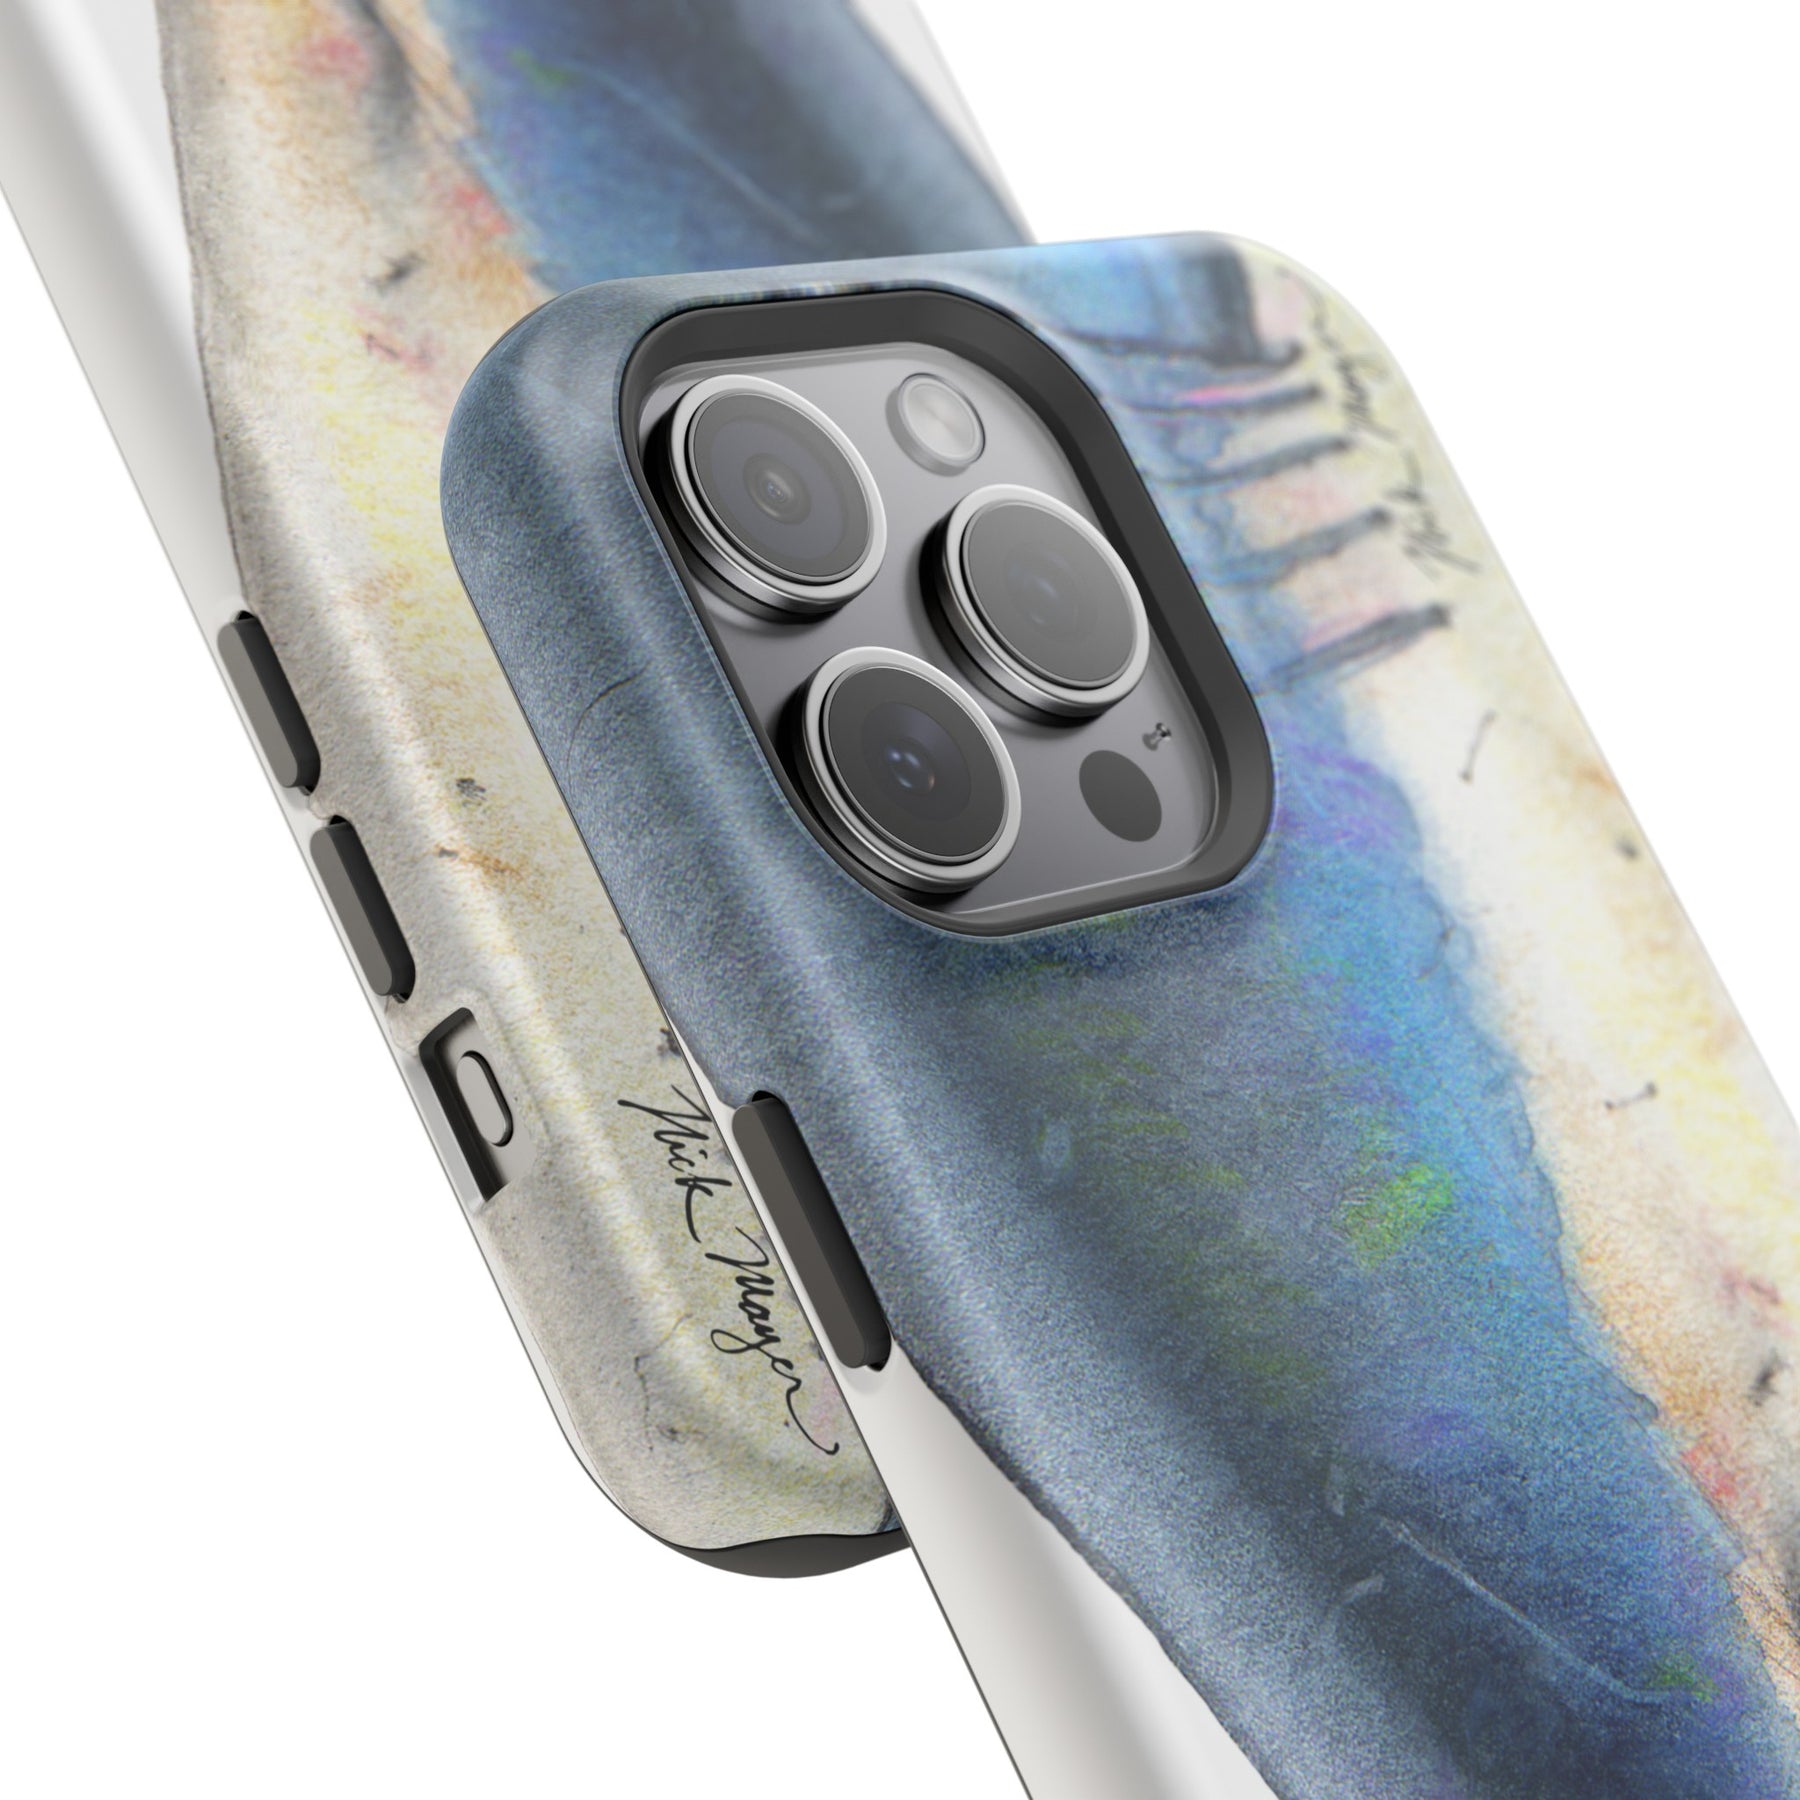 Great White Shark Face MagSafe iPhone Case